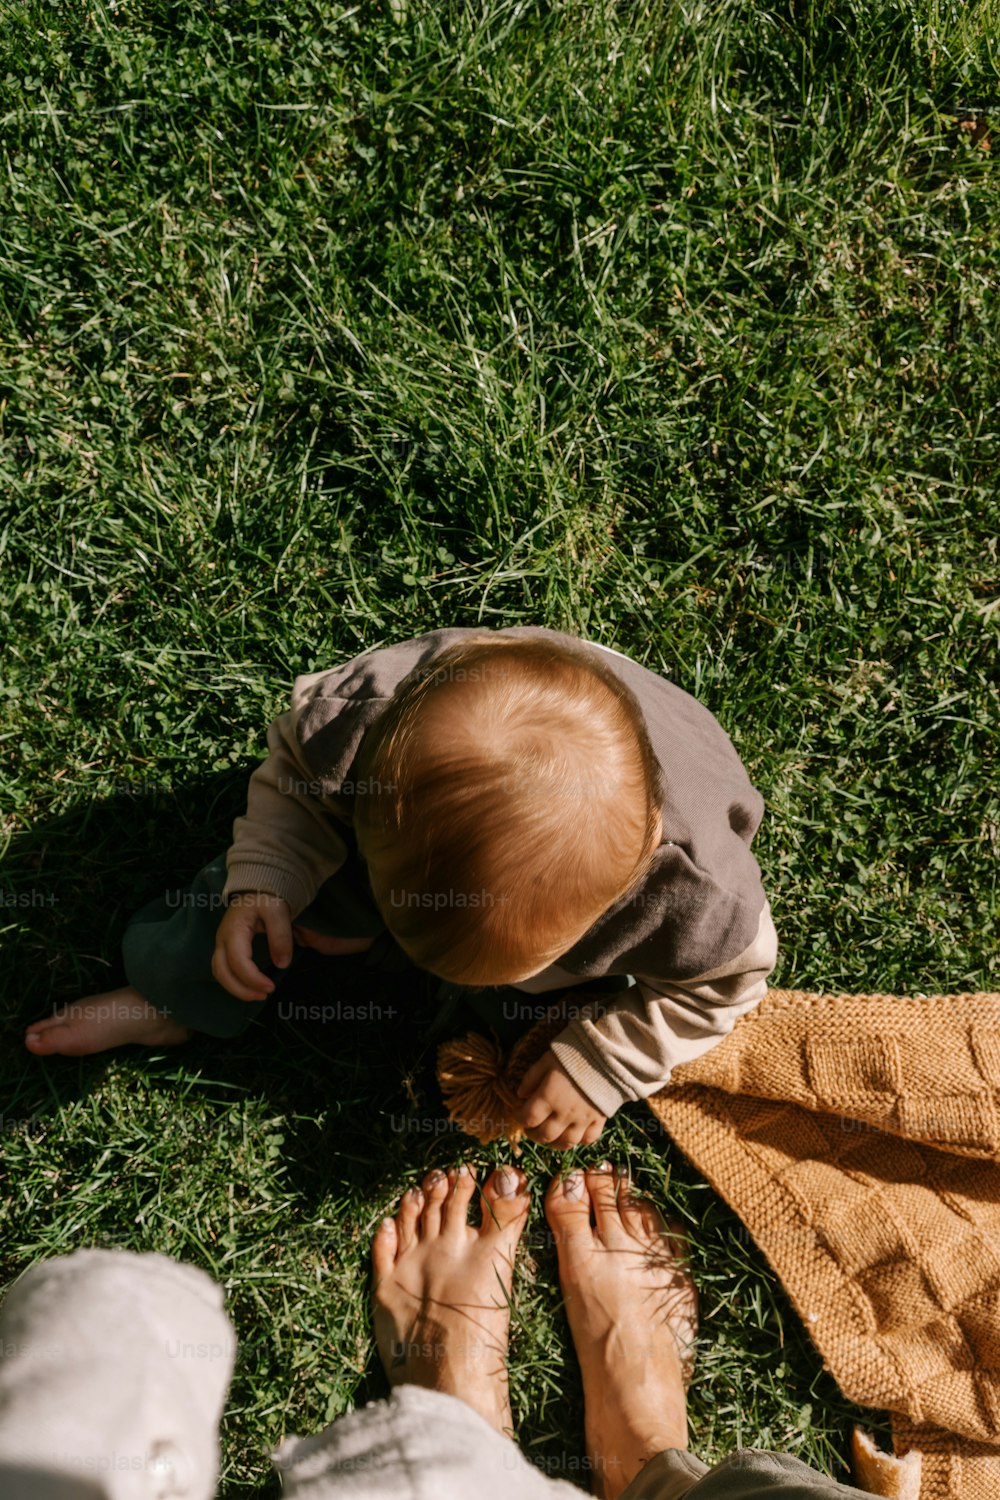 a baby sitting on a blanket on the grass